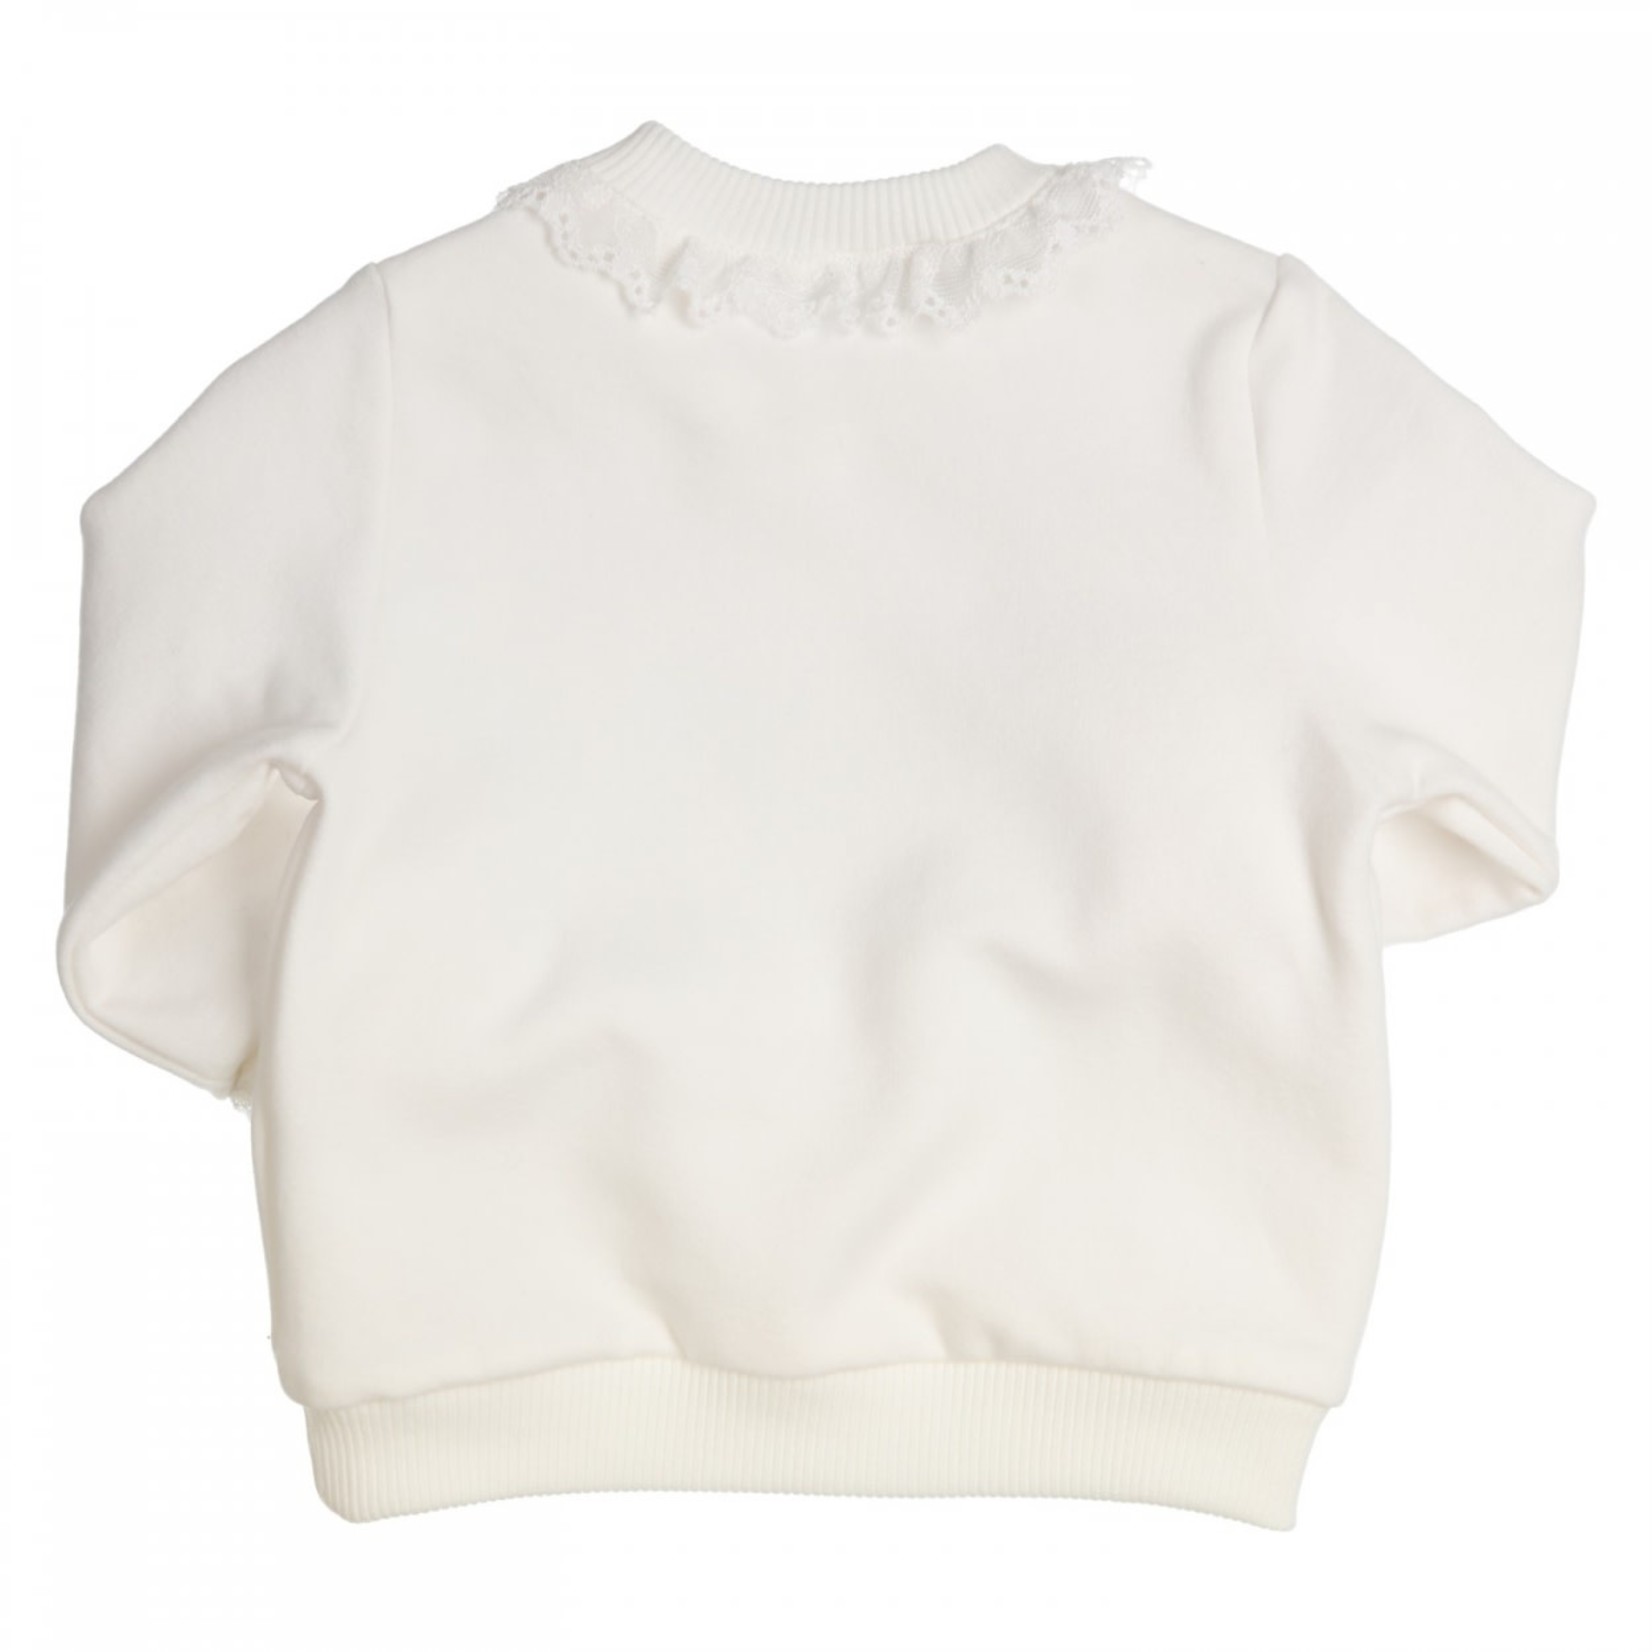 Gymp Sweater Lace Collar/Cuffs - Gymp